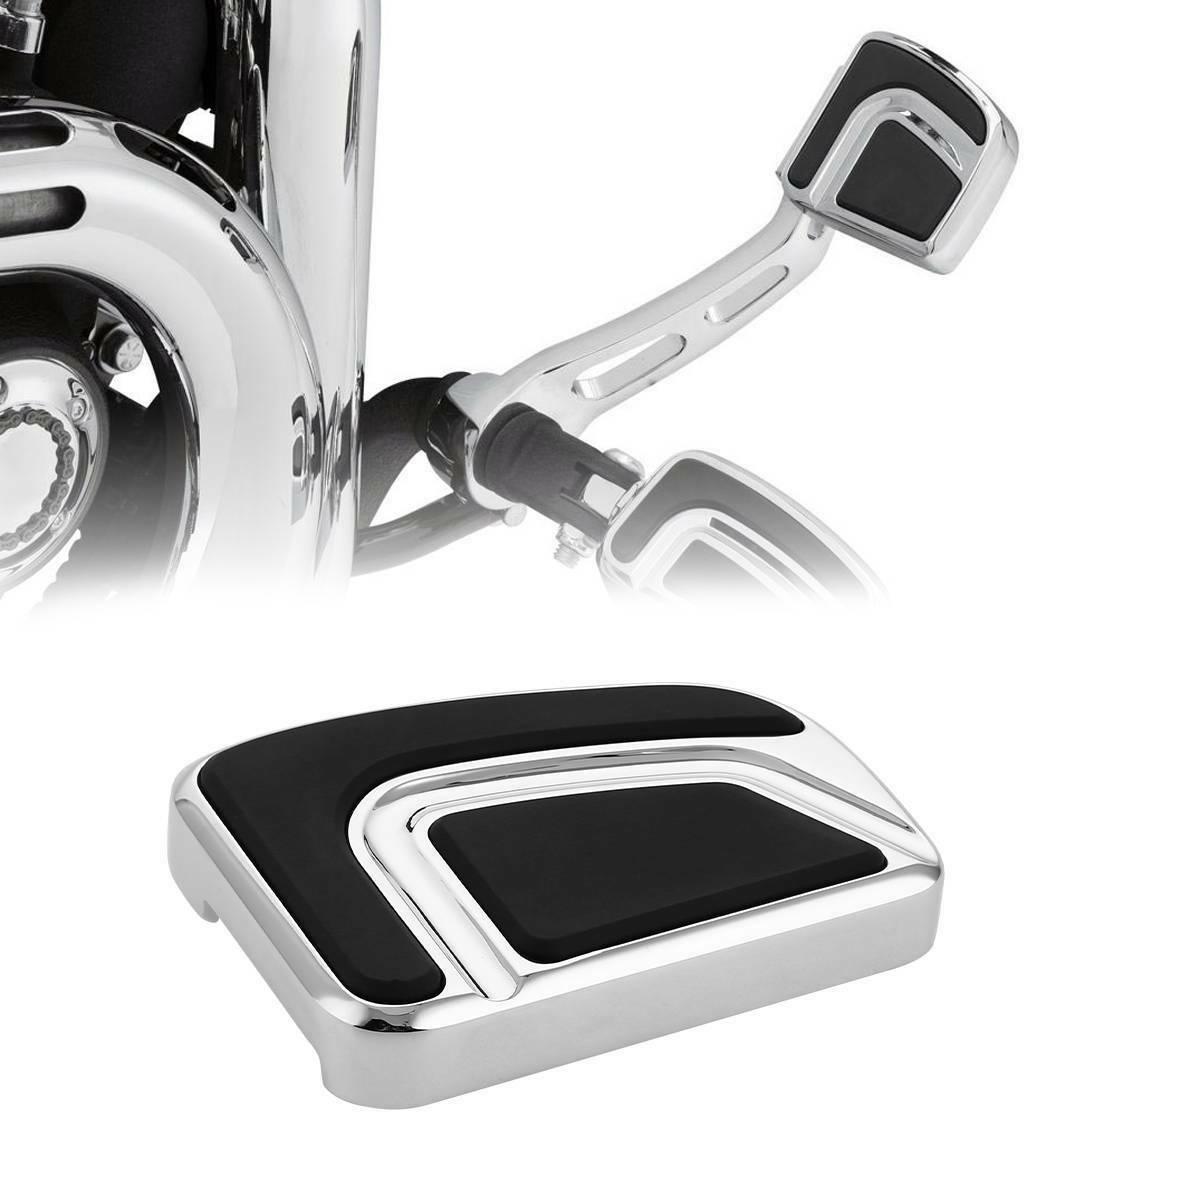 Chrome Airflow Large Brake Pedal Fit For Harley Touring Tri Glide Softail FLST - Moto Life Products